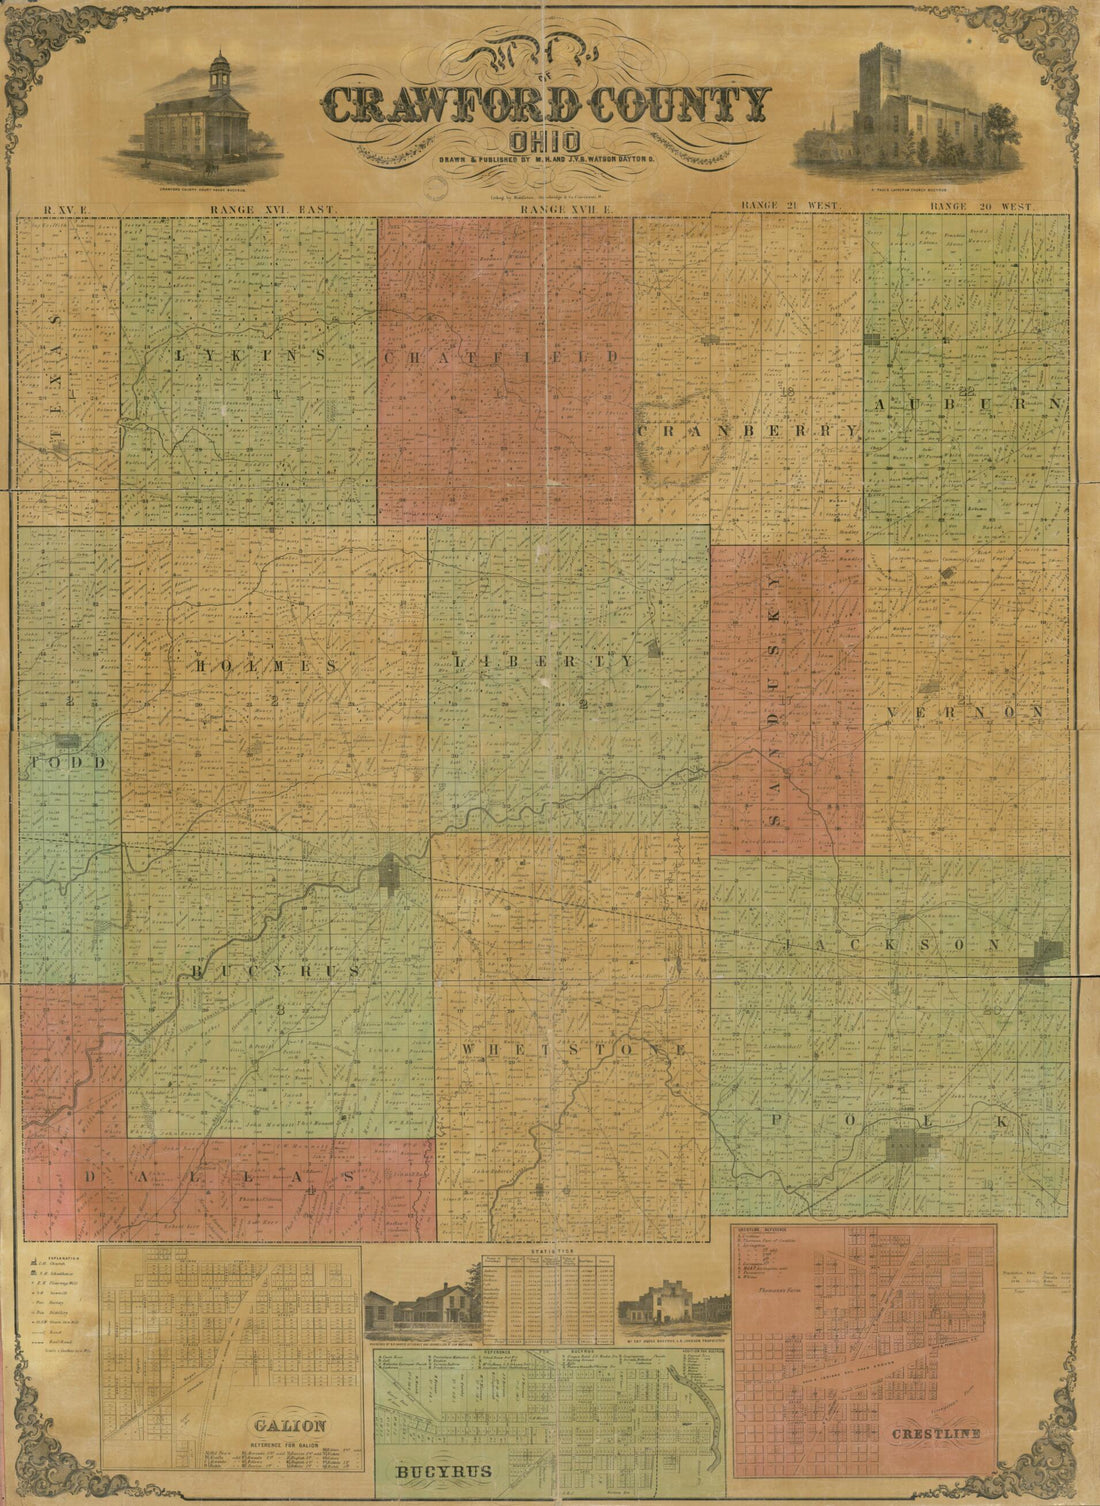 This old map of Map of Crawford County, Ohio from 1850 was created by  M.H. And J.V.B Watson in 1850